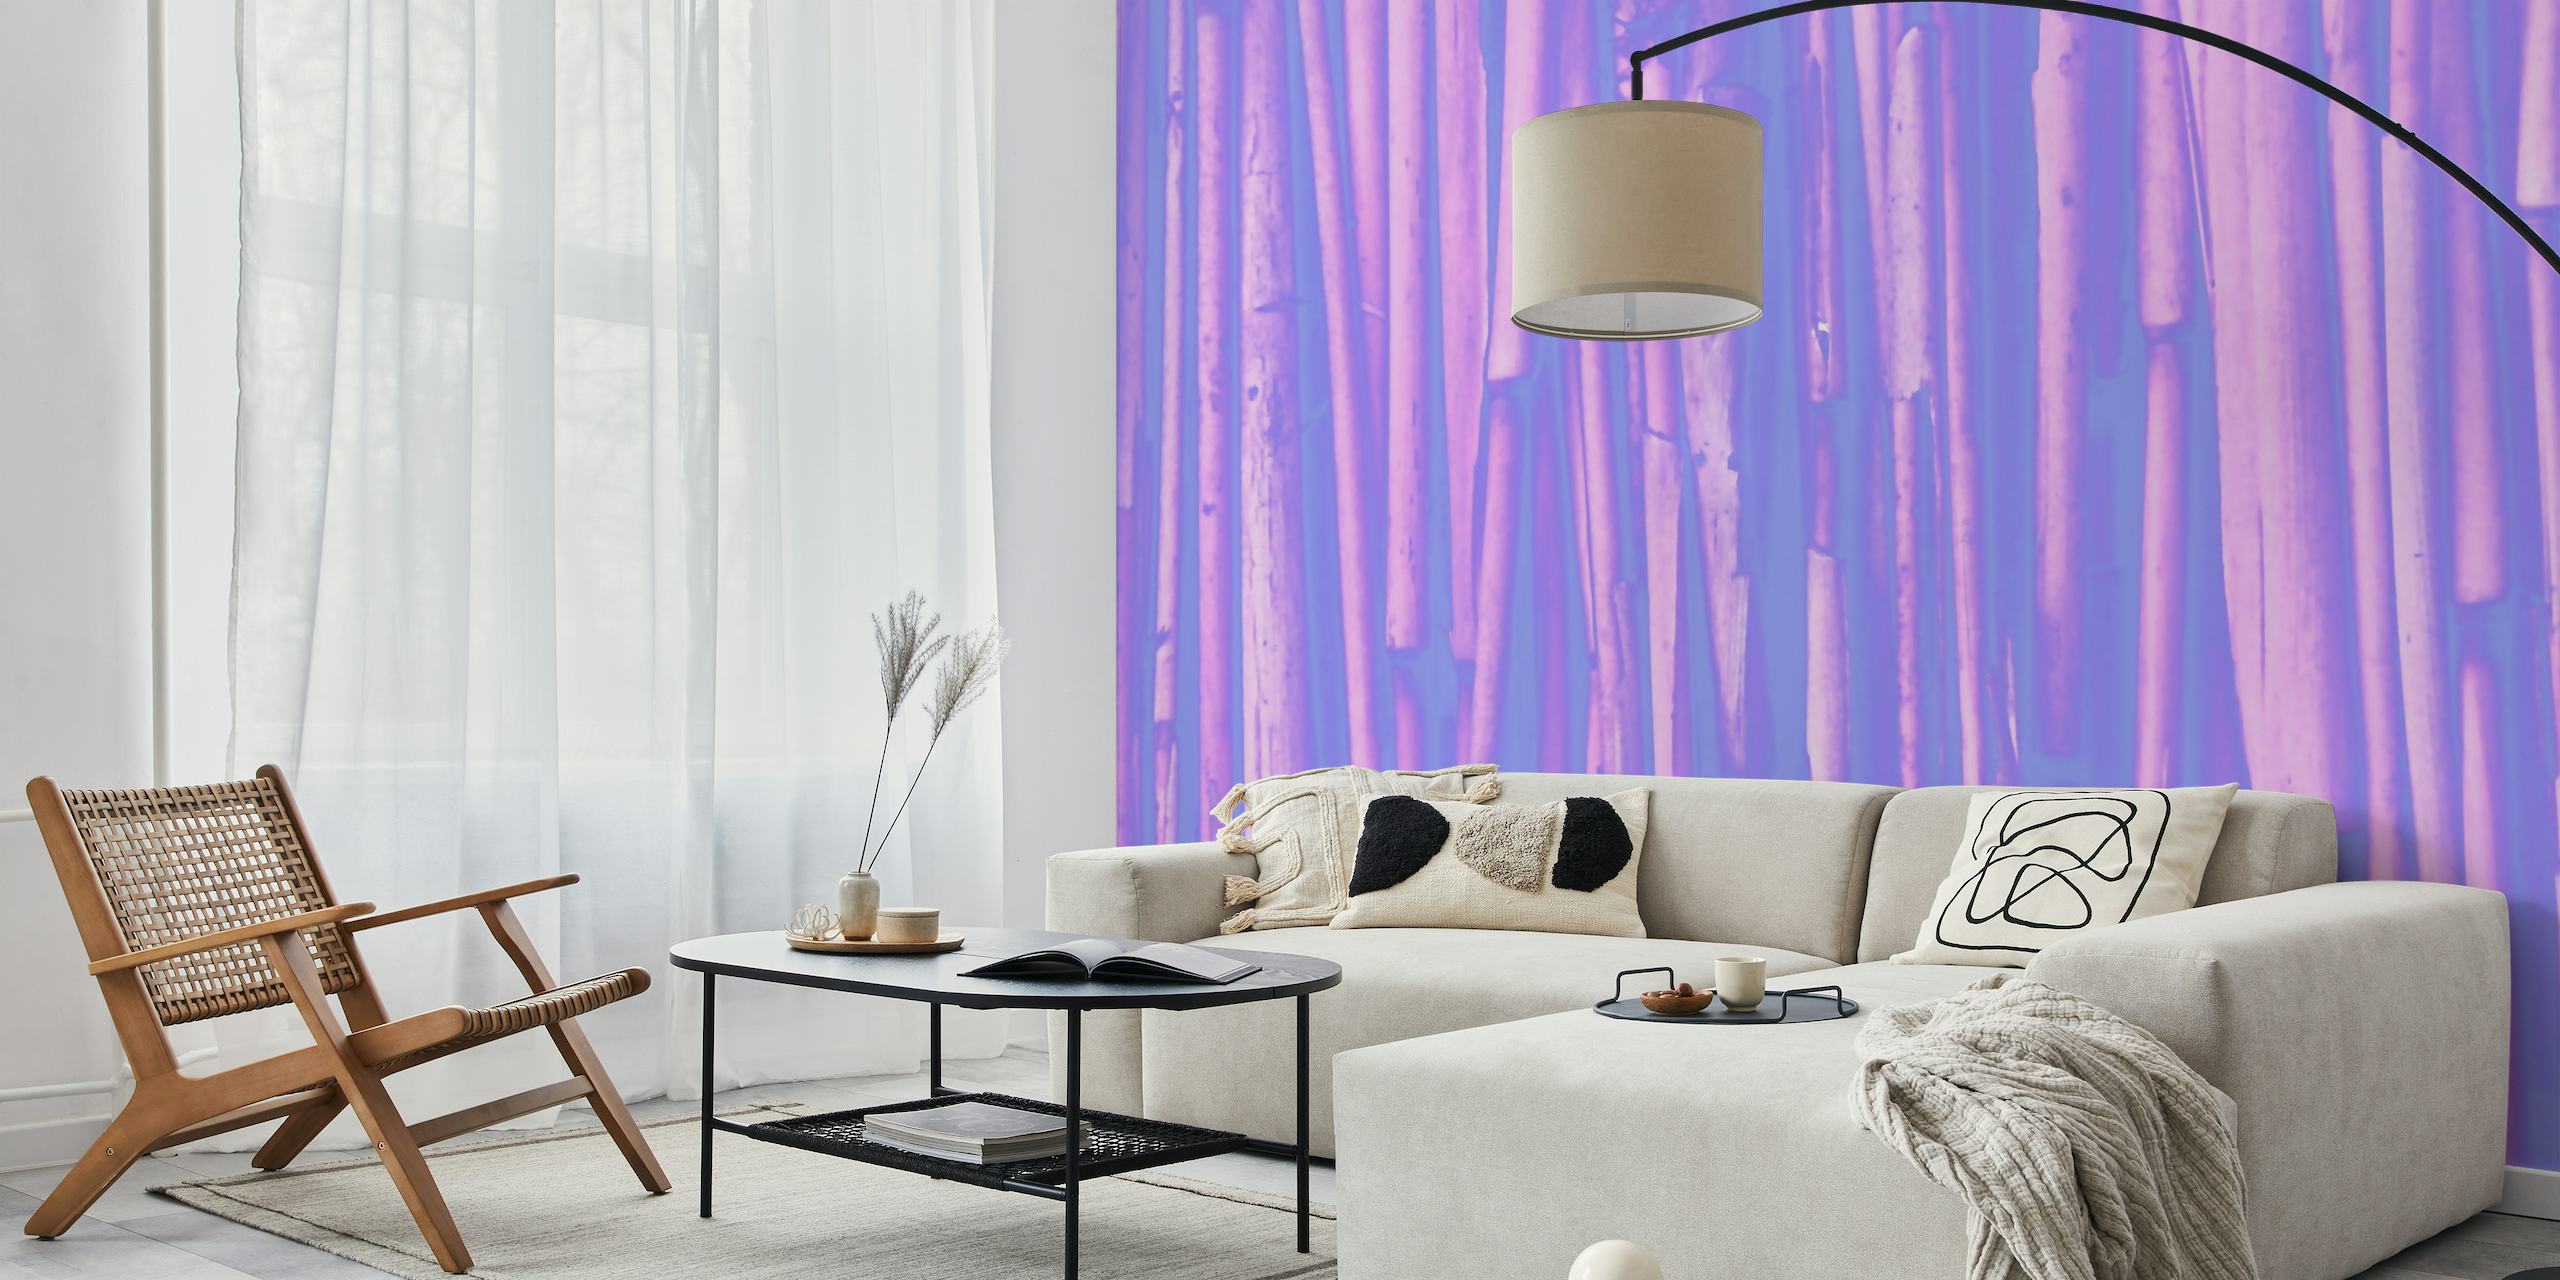 Wall mural of stylized purple bamboo canes creating a calm and elegant atmosphere.